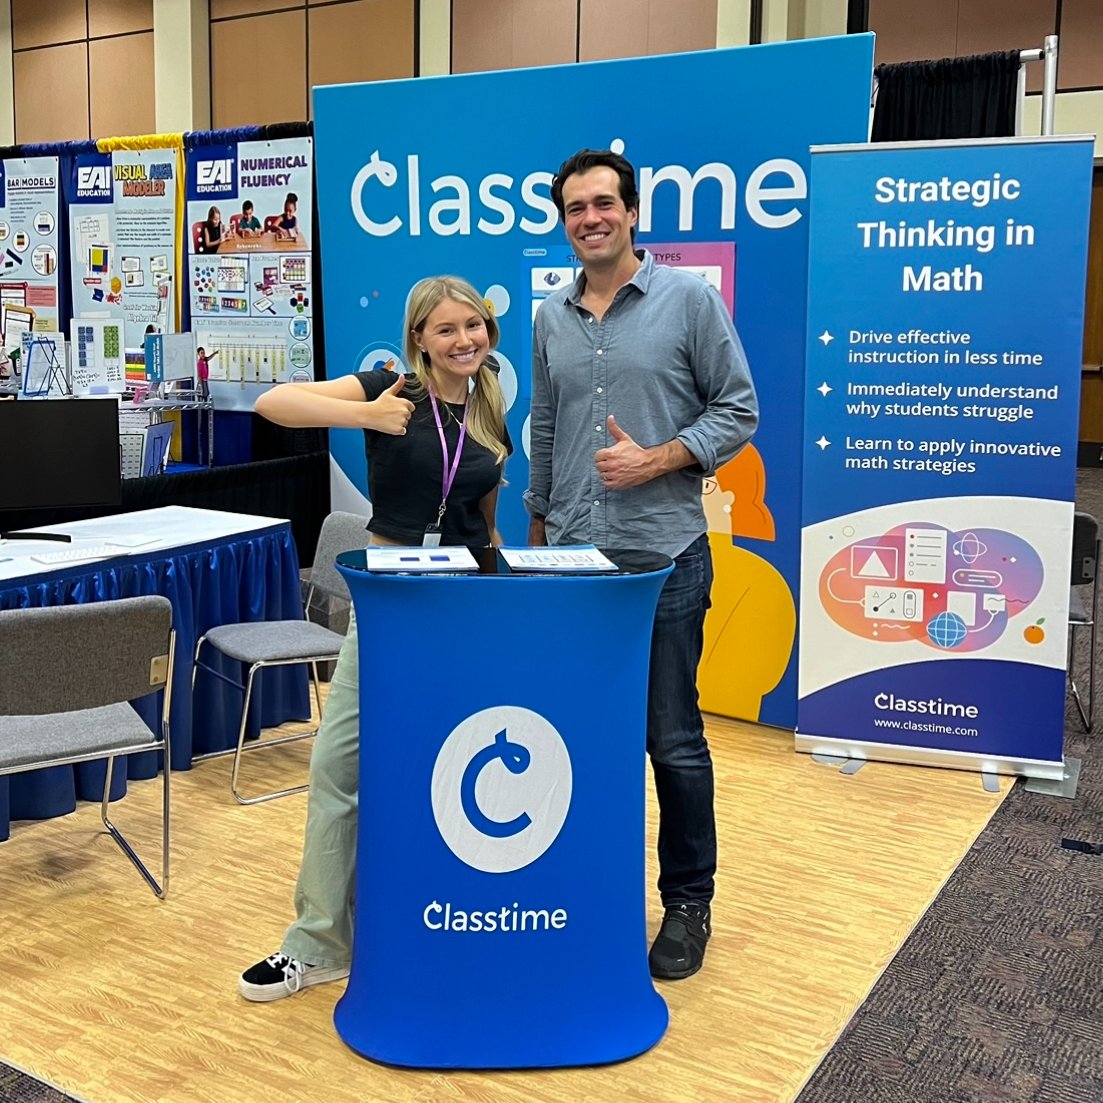 We are looking forward to sharing Strategic Thinking in Math with all of the educators at the #CMCMath conference this weekend! Don't forget to visit us at booth 419. #Classtime @CAMathCouncil